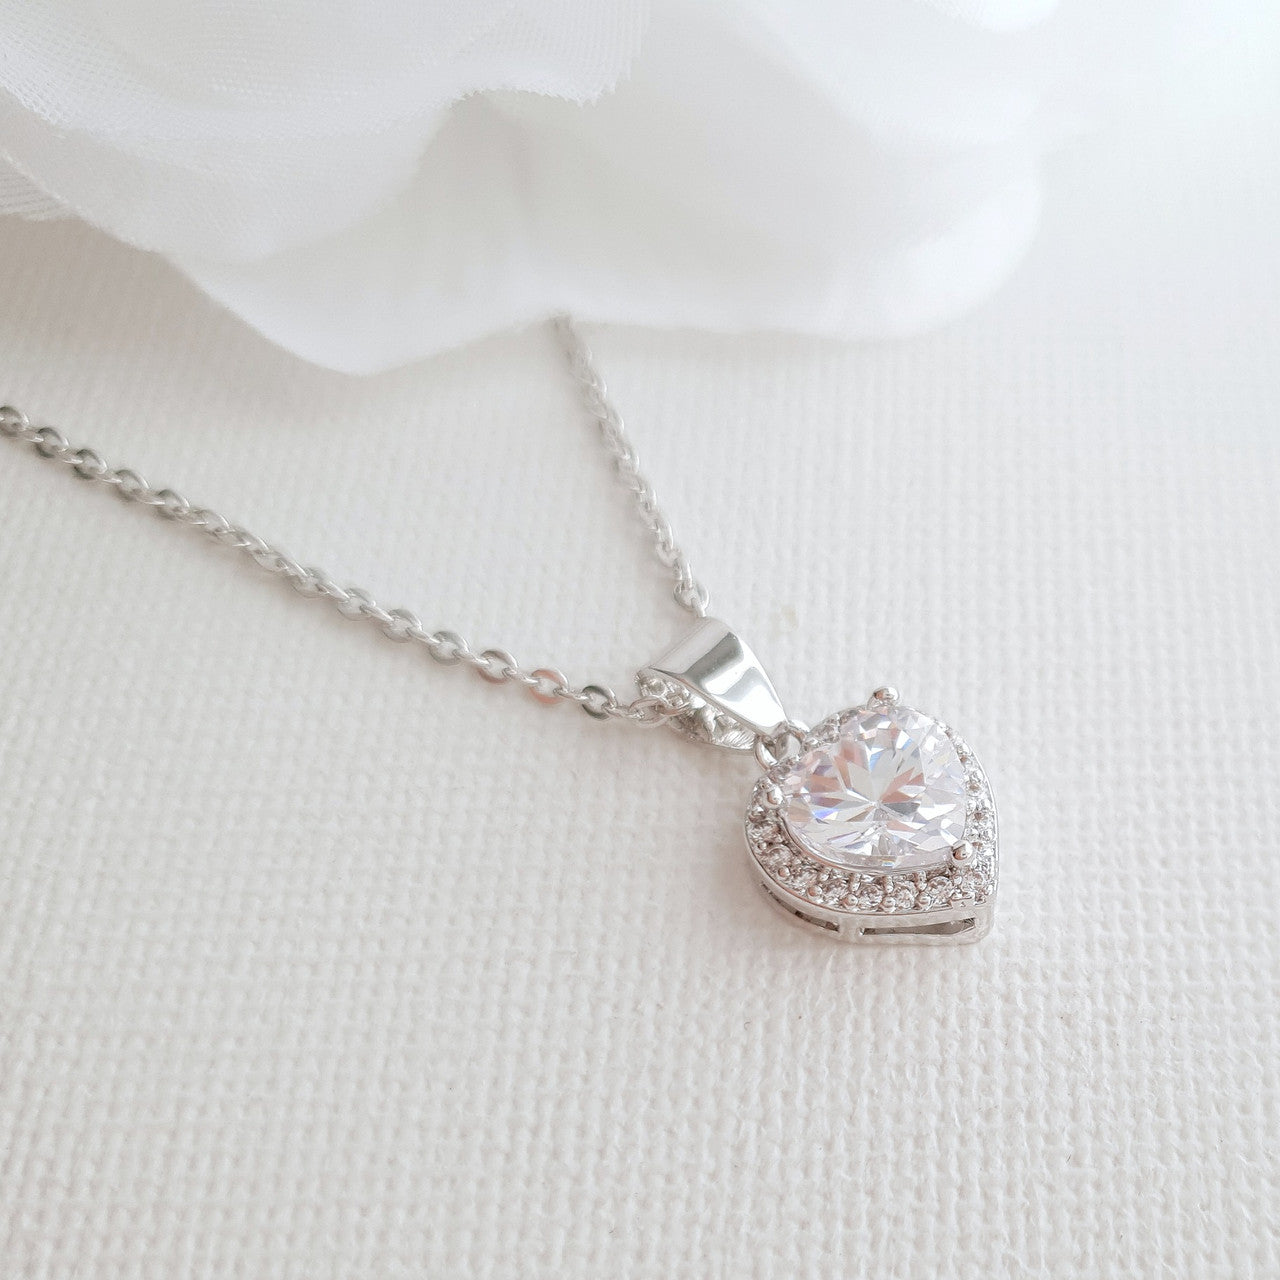 Gift a Heart Pendant Necklace- Diana